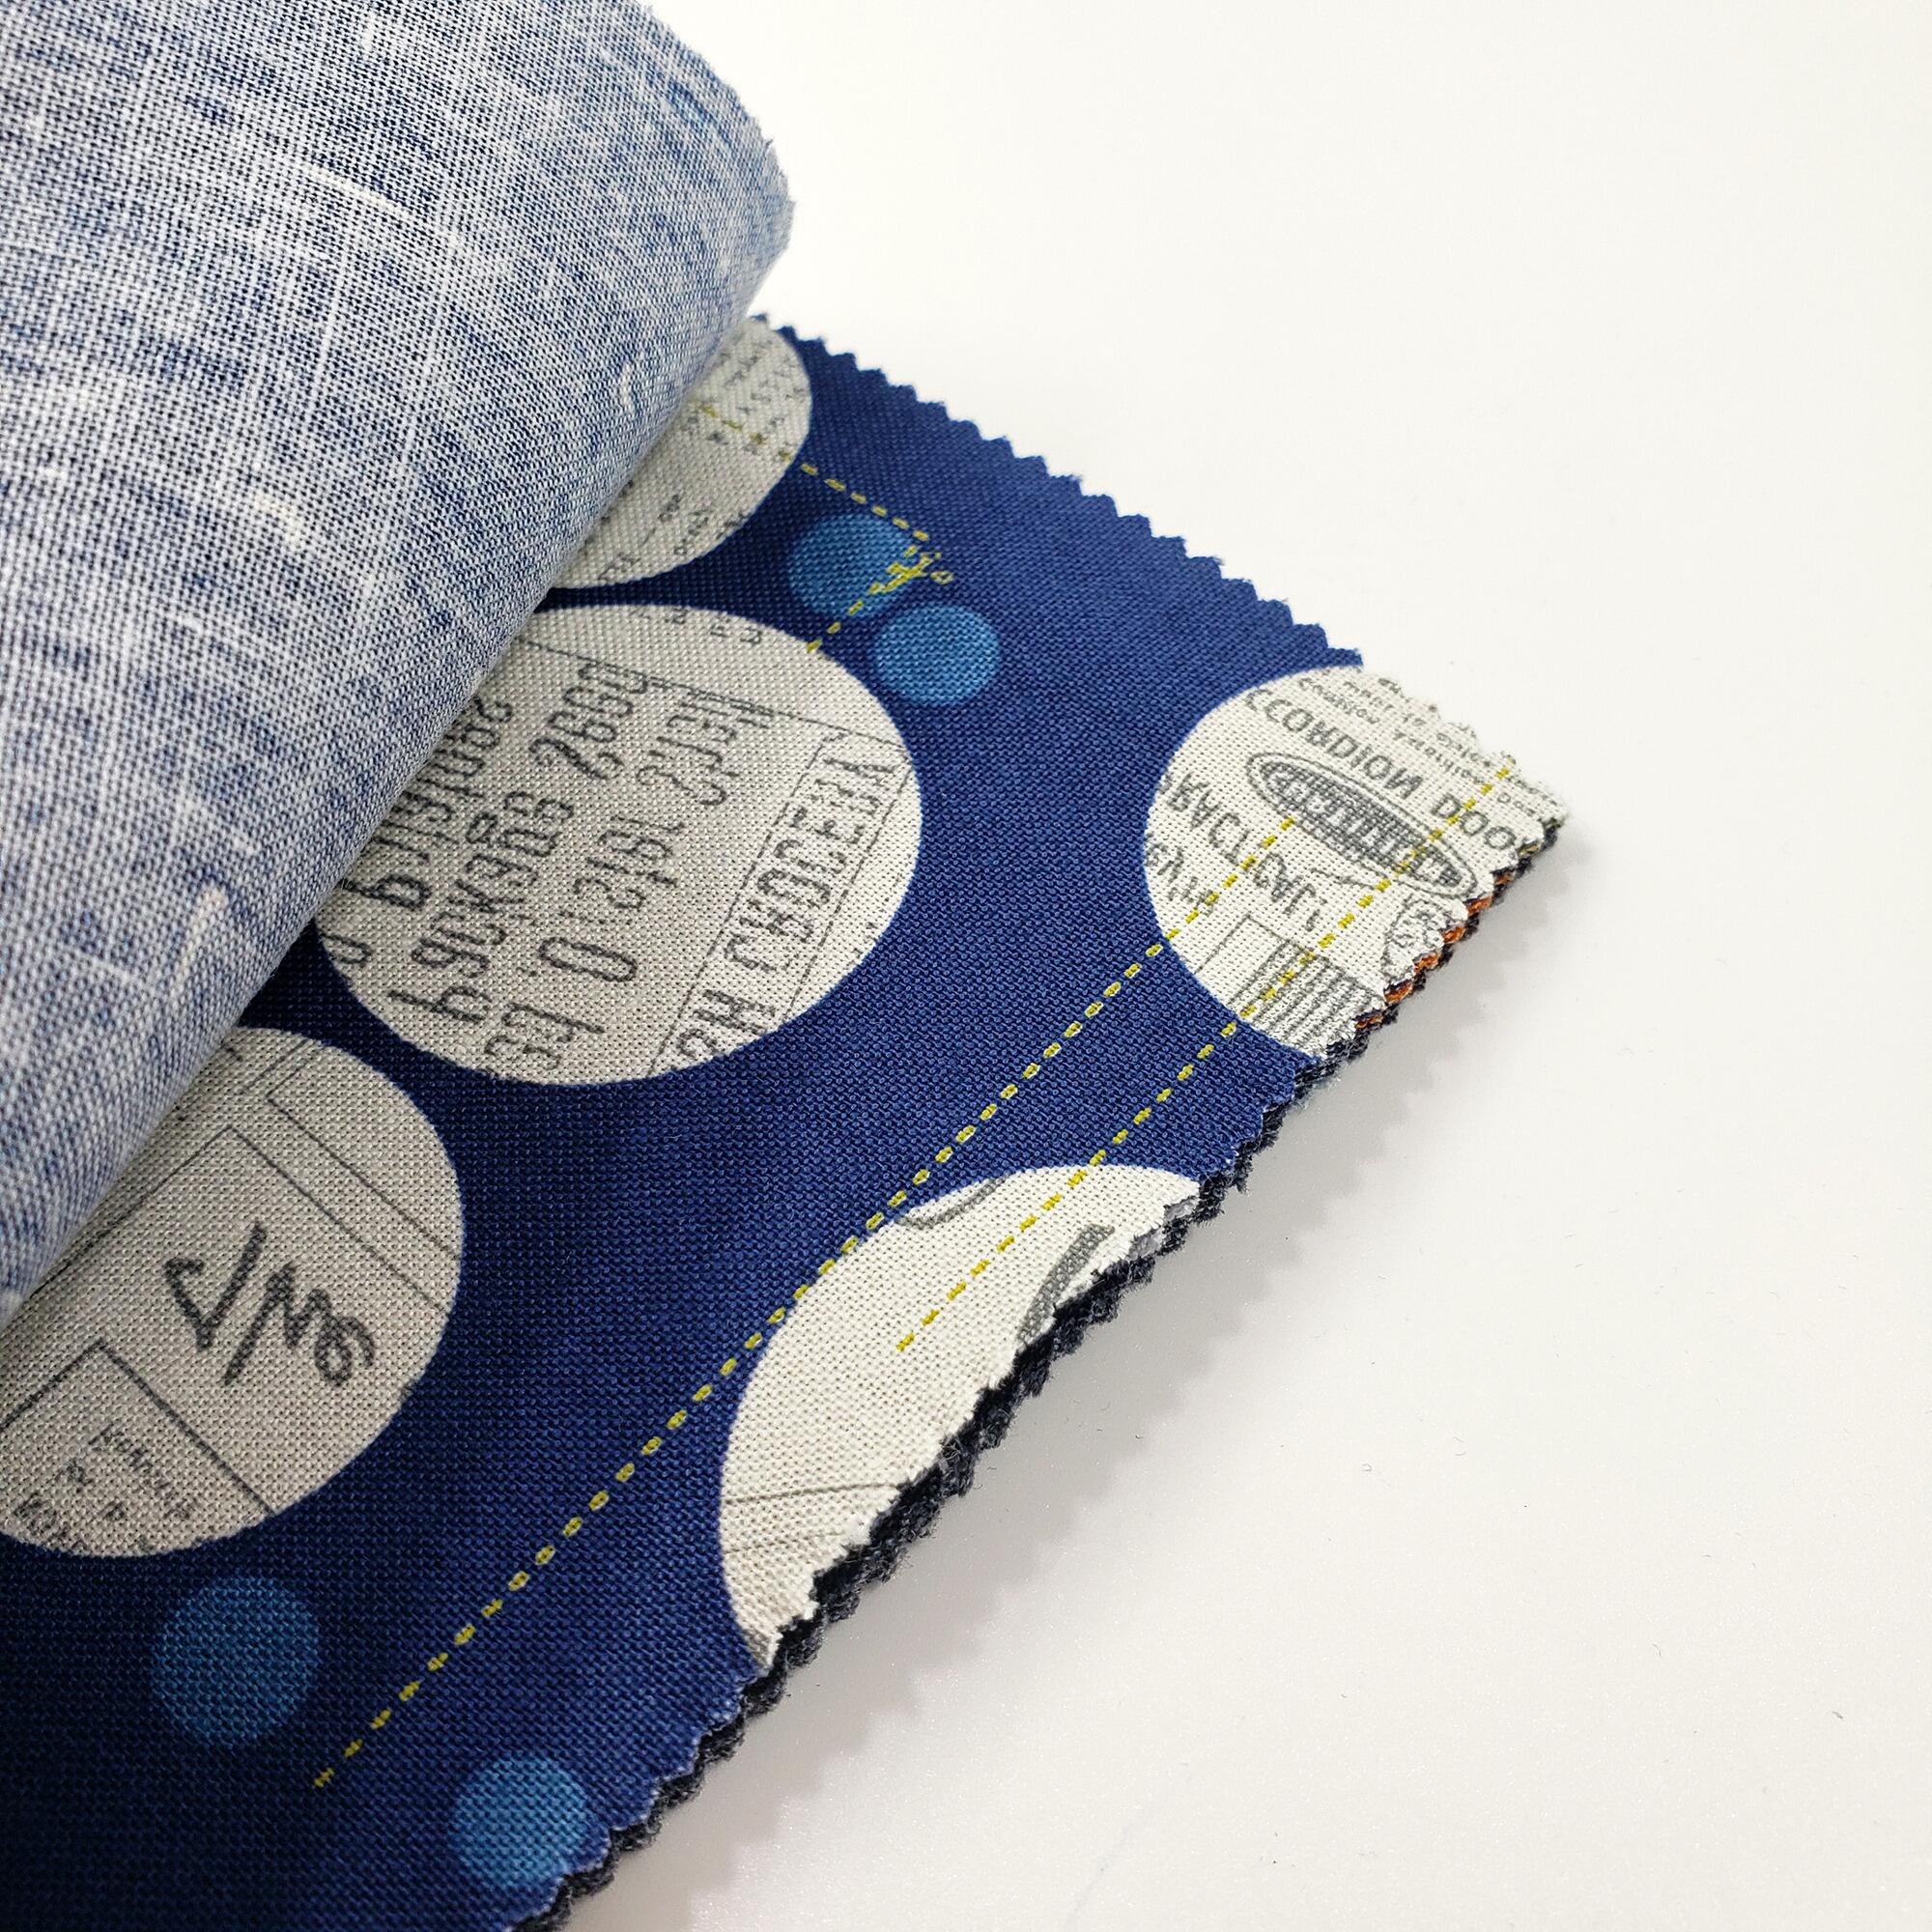 zen chic, blueish, sewing themed, cotton,junk journal,scrappy fabric, moda,charm pack, fabric squares, 5" squares